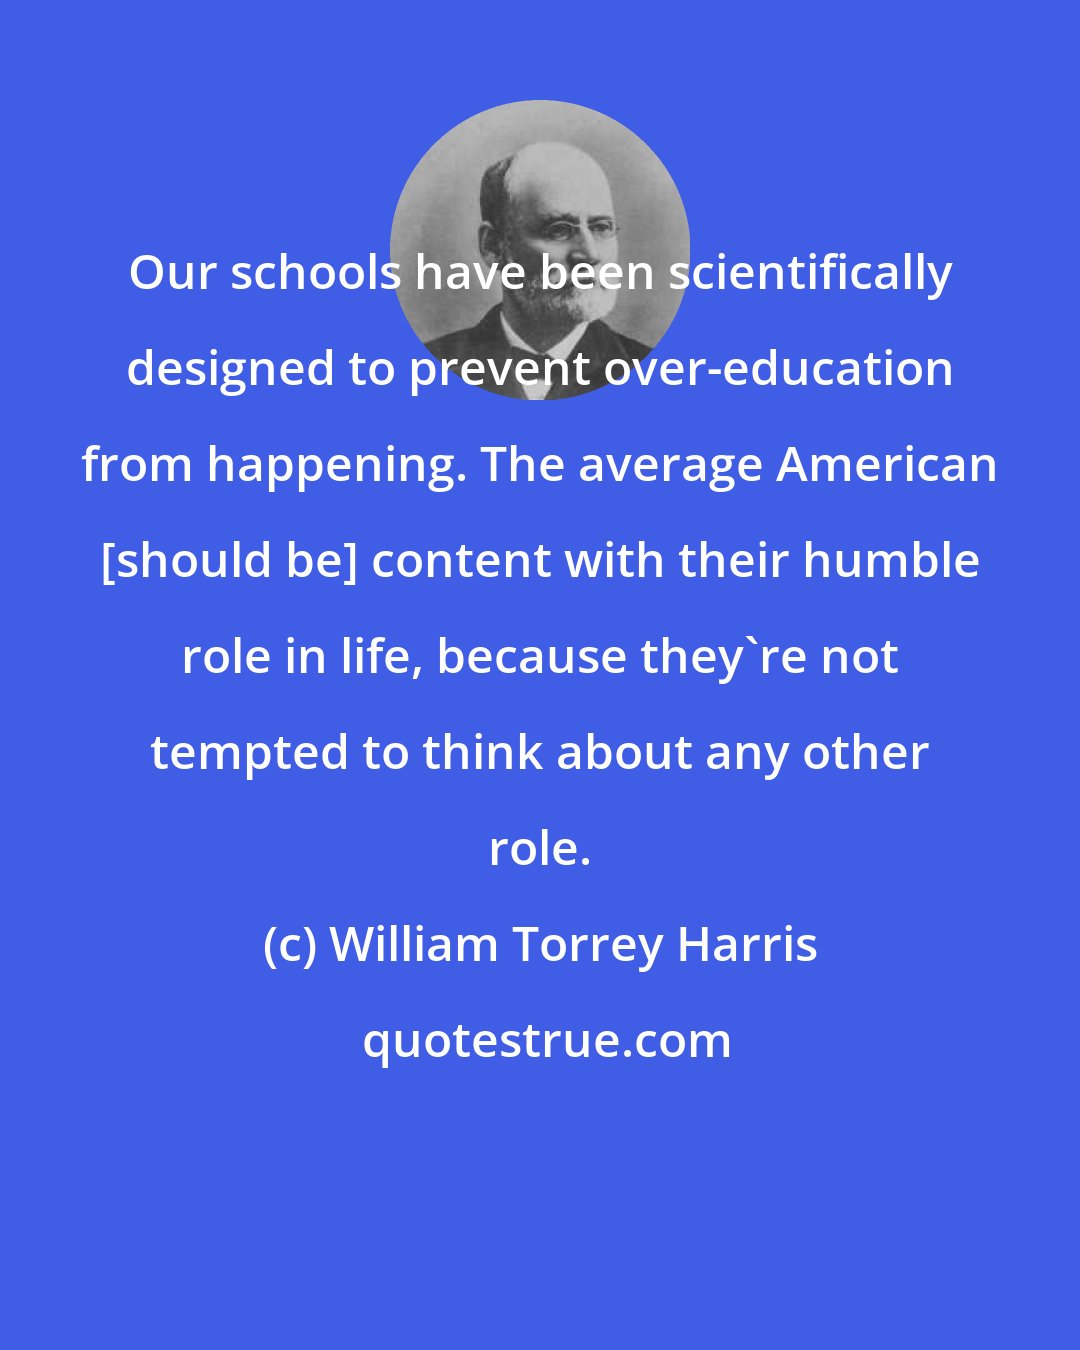 William Torrey Harris: Our schools have been scientifically designed to prevent over-education from happening. The average American [should be] content with their humble role in life, because they're not tempted to think about any other role.